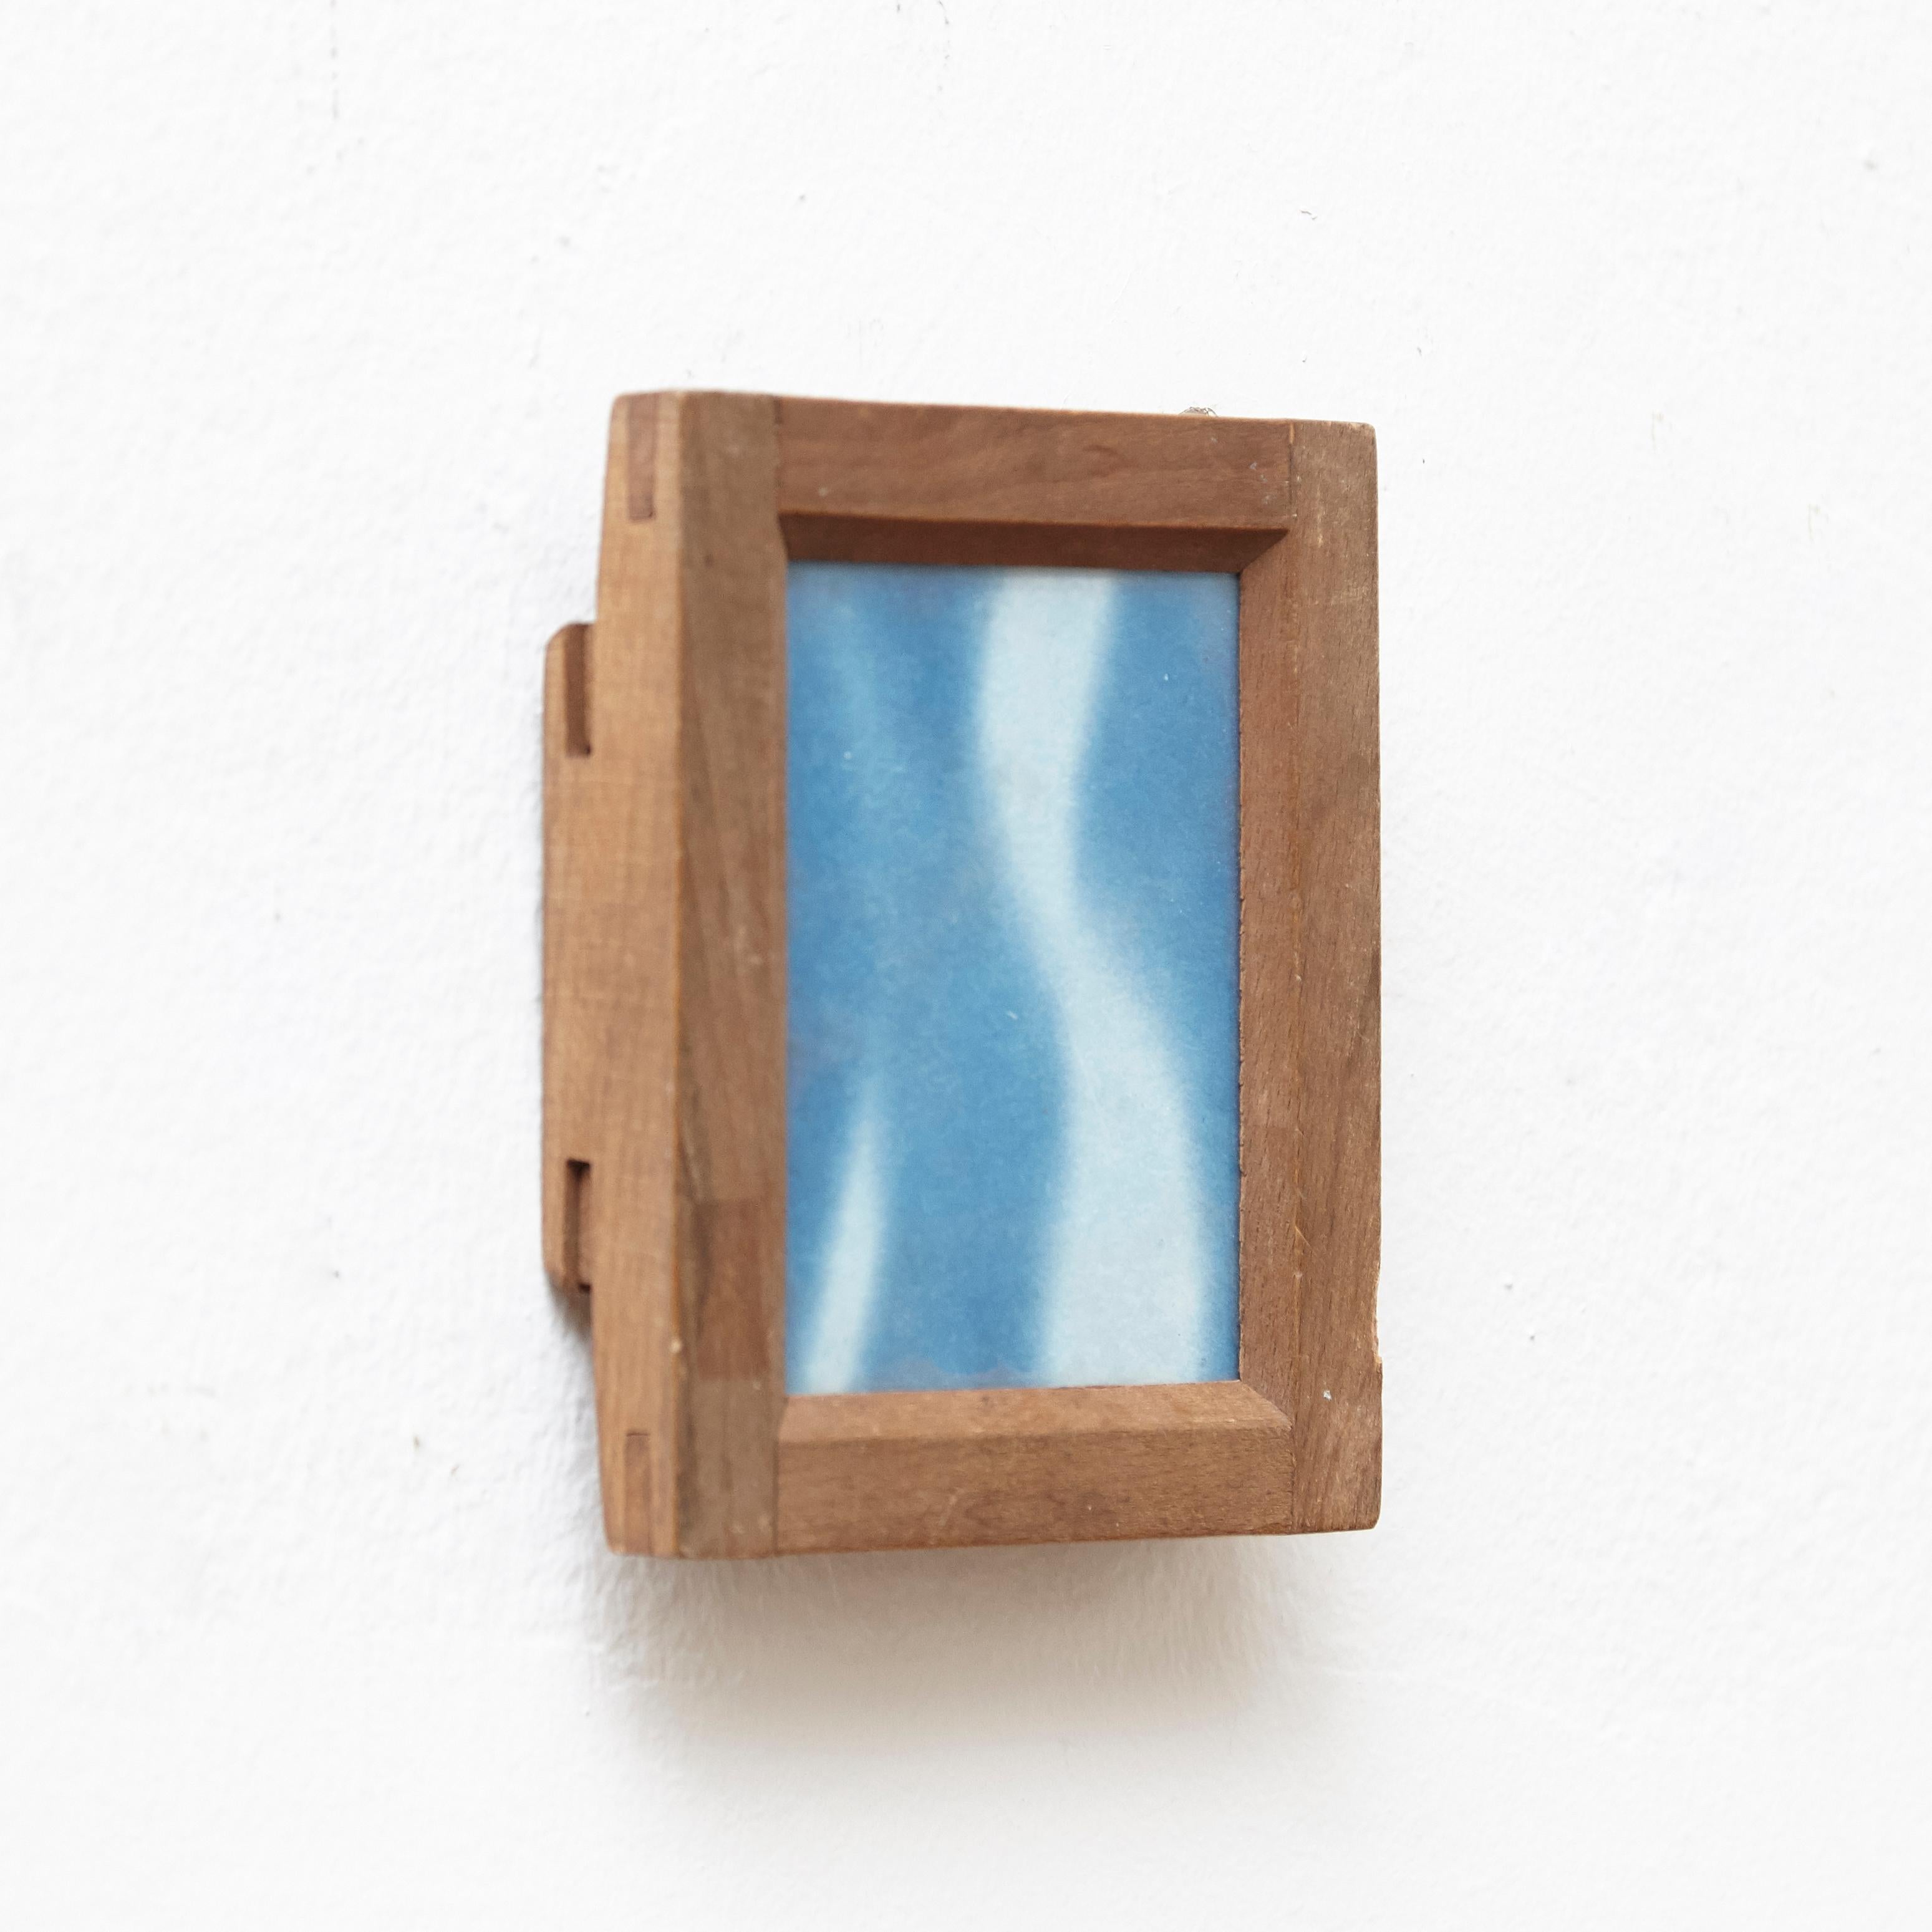 Contemporary abstract Cyanotype by Adrian, 2017.

Adrian Contemporary Blue and White Cyanotype Photography on a Wooden Frame, 2017
 